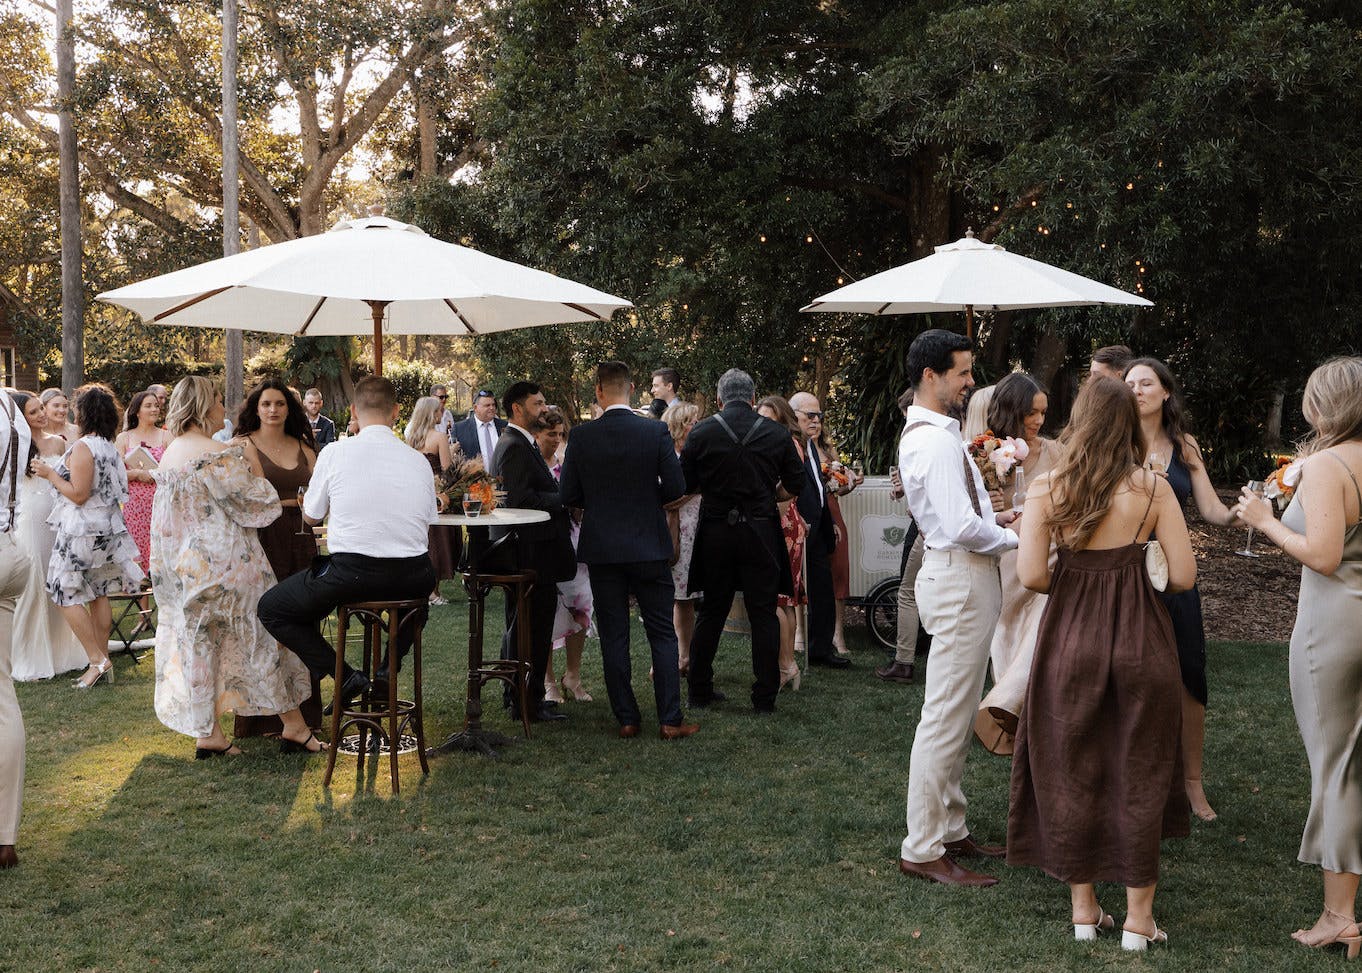 A group of people dressed in formal attire socializes at an outdoor event. They are gathered around white umbrellas and cocktail tables on a grassy area, with trees and string lights in the background. Some are holding drinks, while others are engaged in conversation.